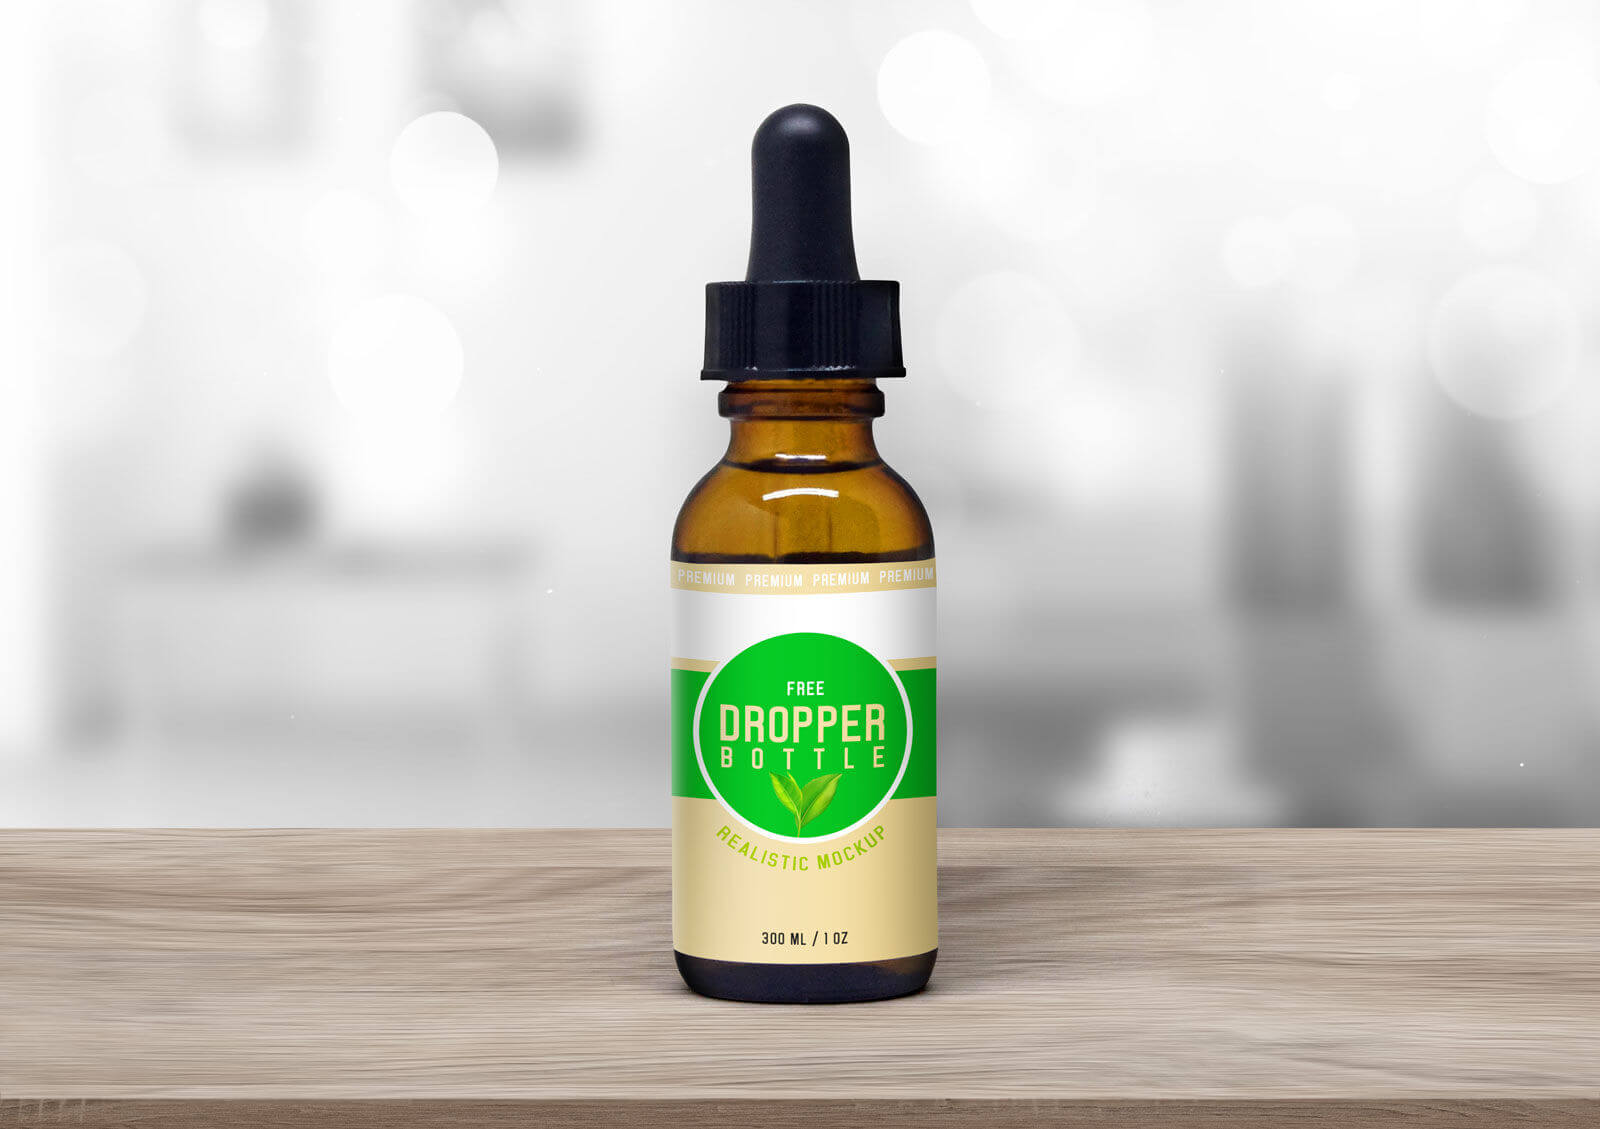 front view of glass dropper bottle on wooden surface mockup 2